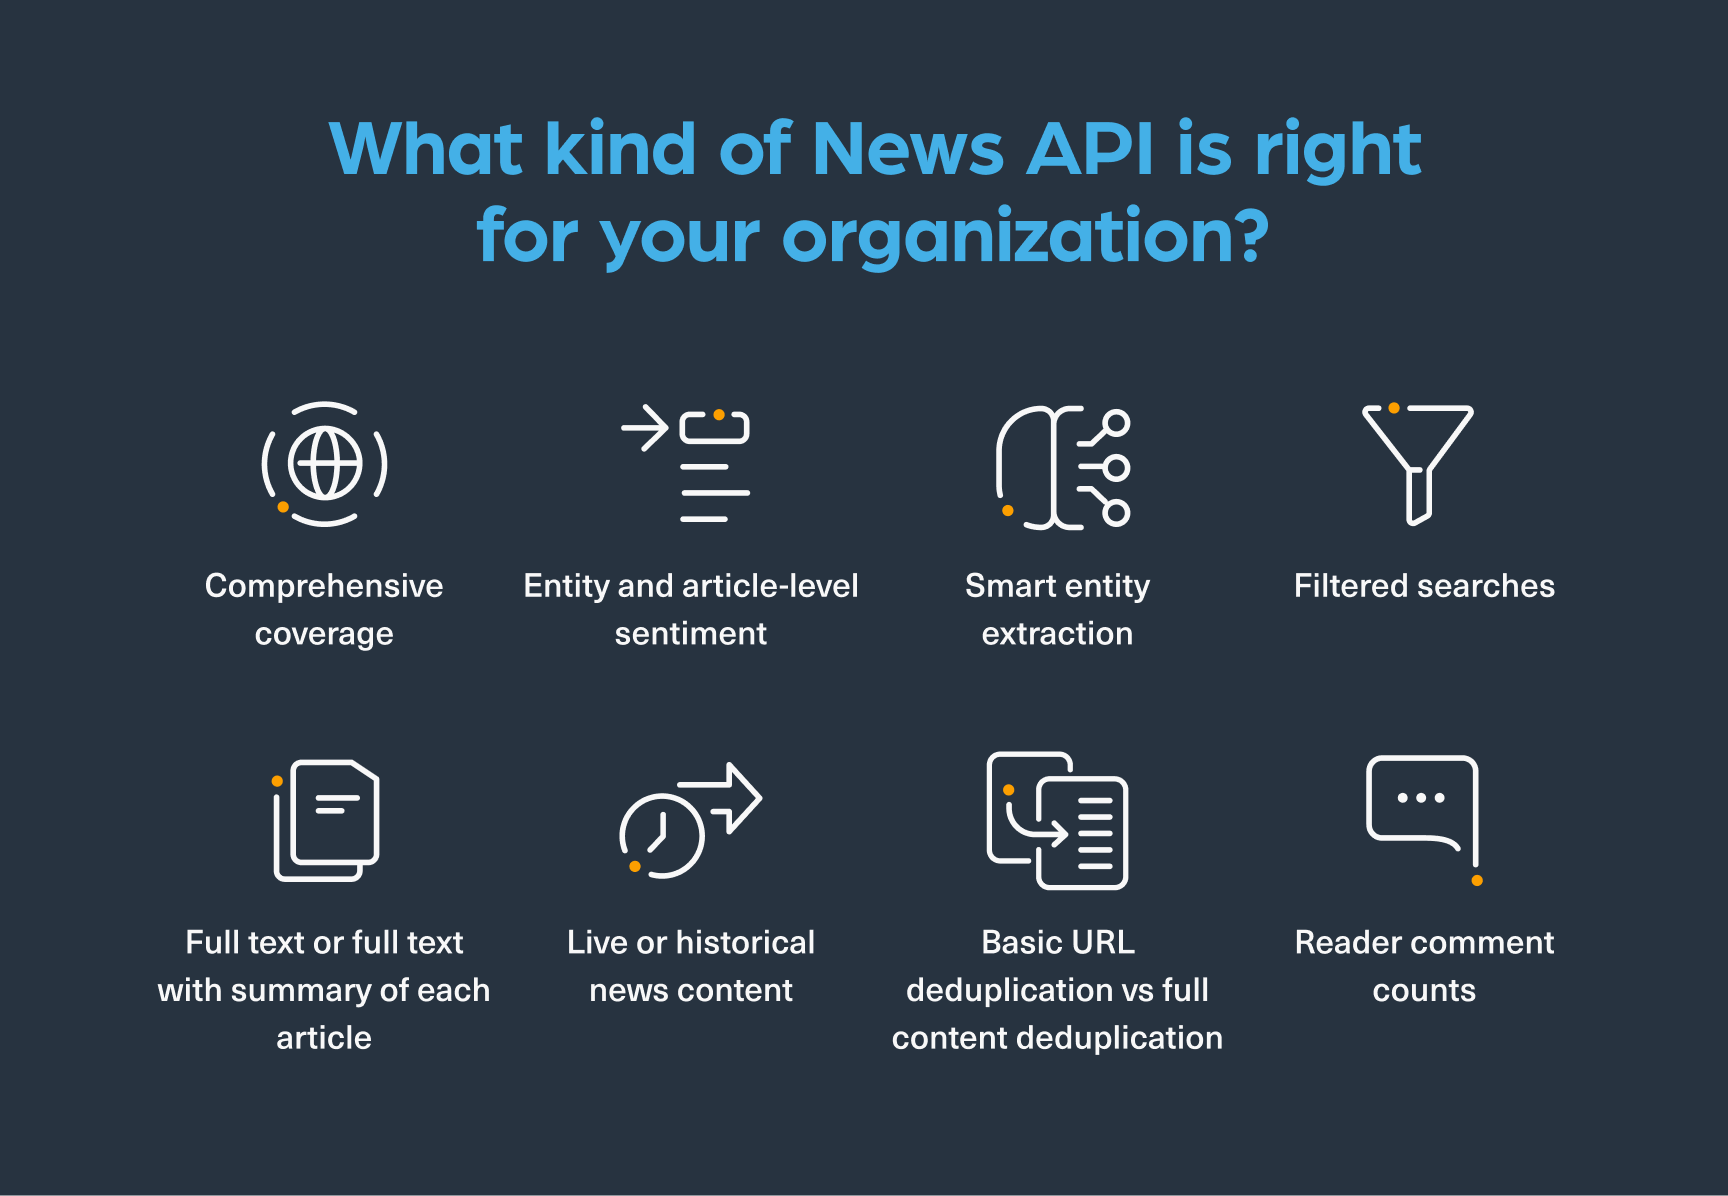 What kind of News API is right for your organization?